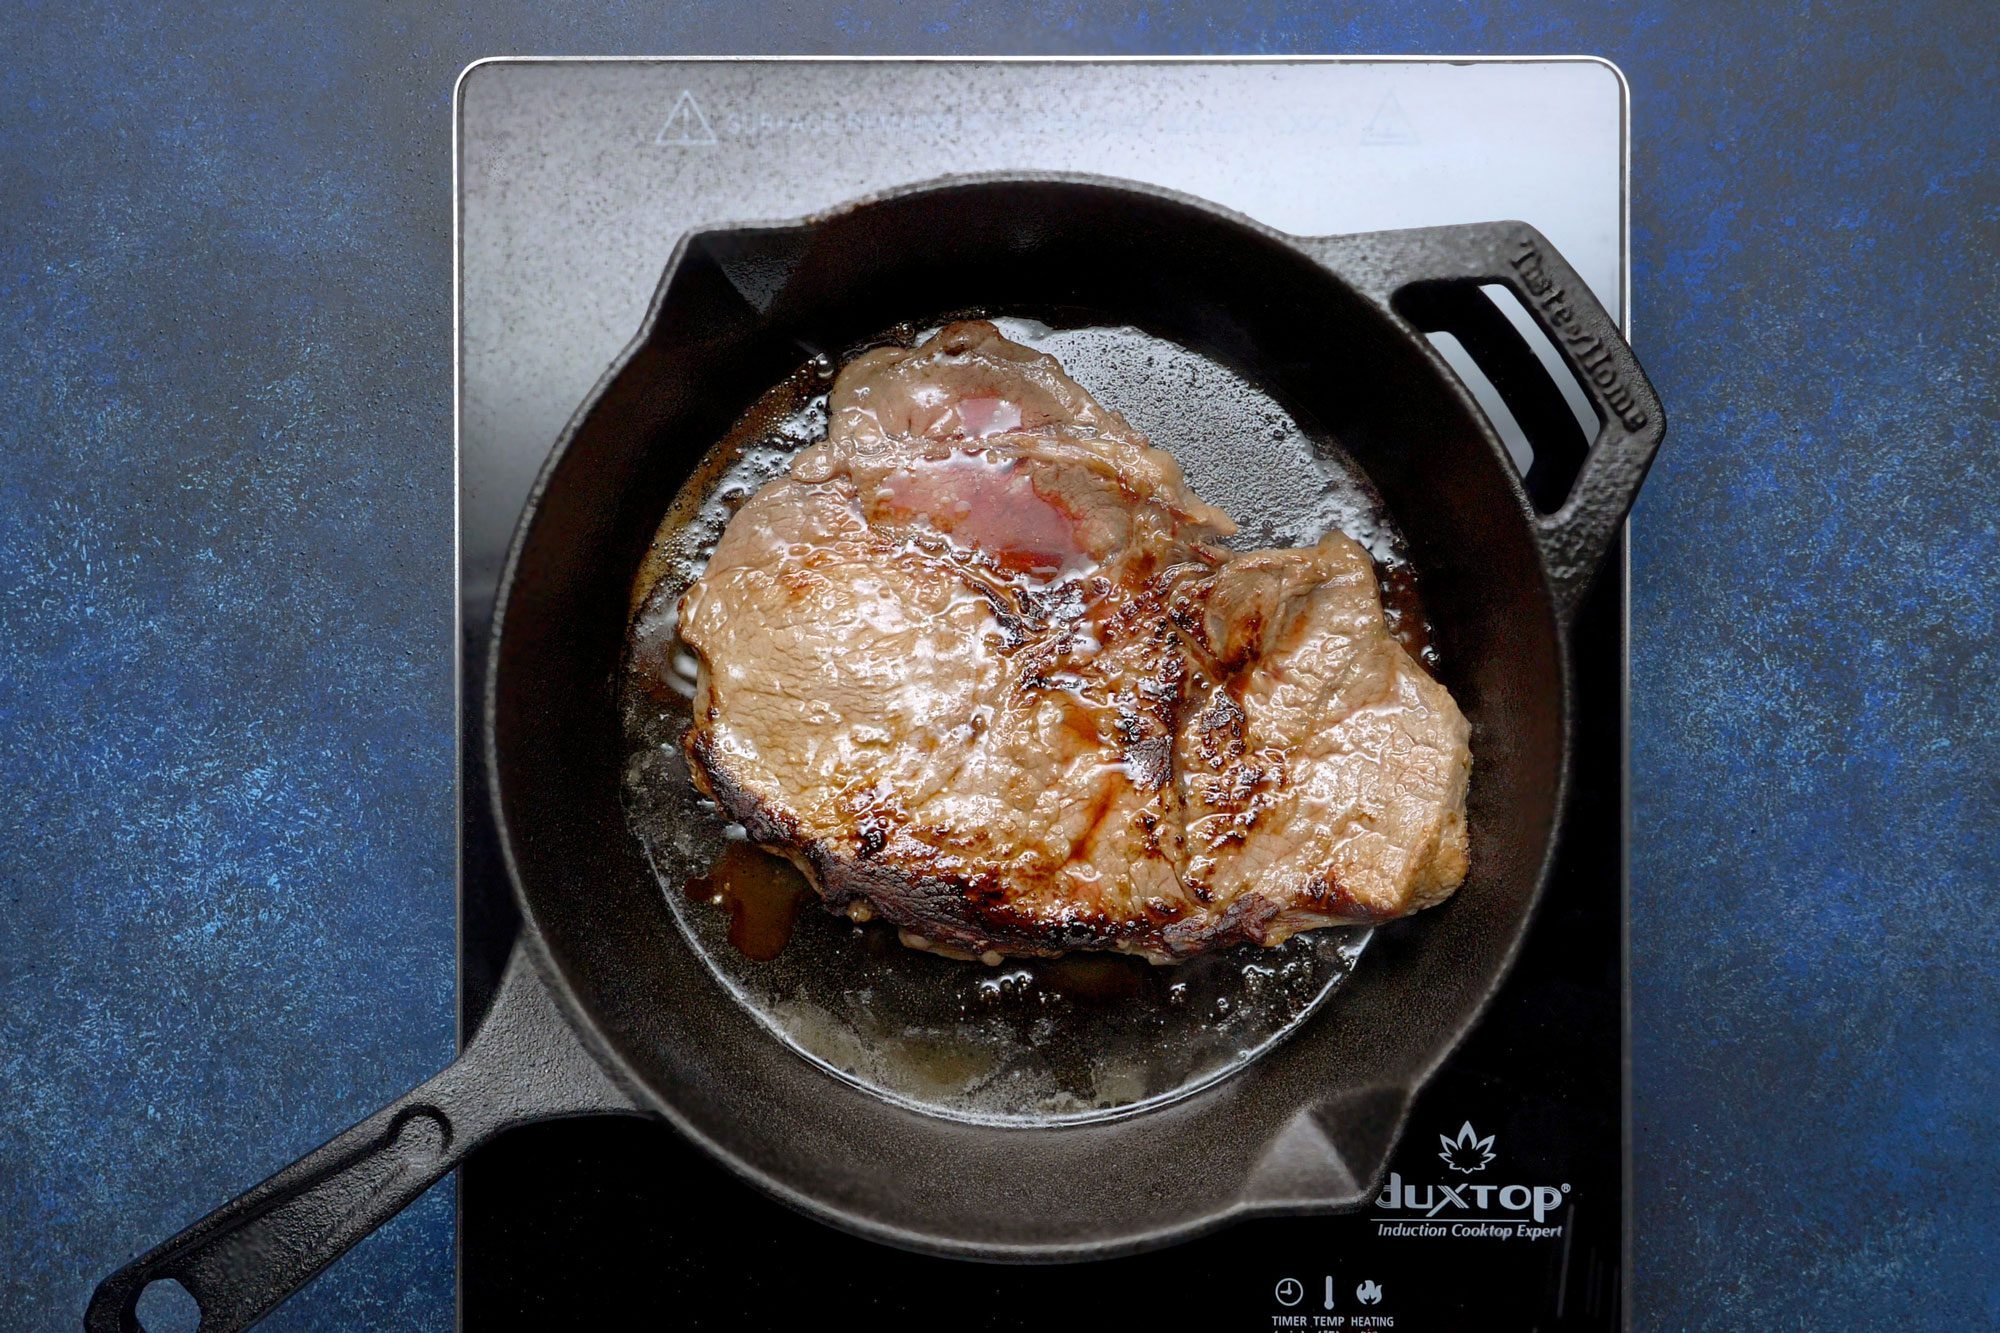 Cook until steak reaches desired doneness in a large skillet